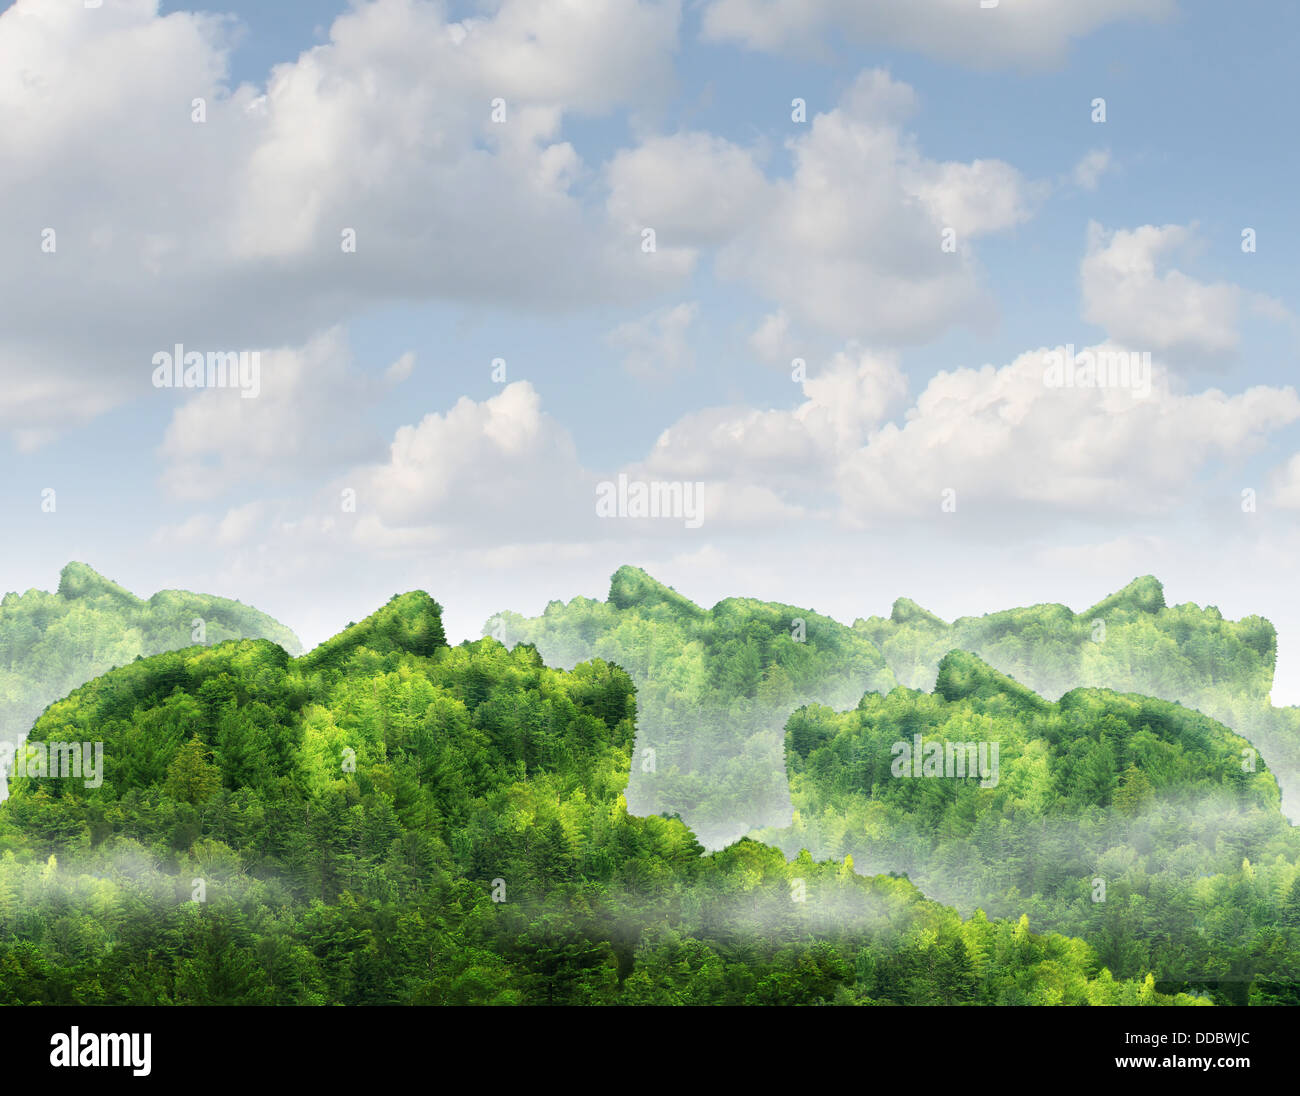 Human communication network business concept with a green forest mountain natural landscape shaped as an organized group of human heads as a technology symbol of partnership connections from person to people. Stock Photo